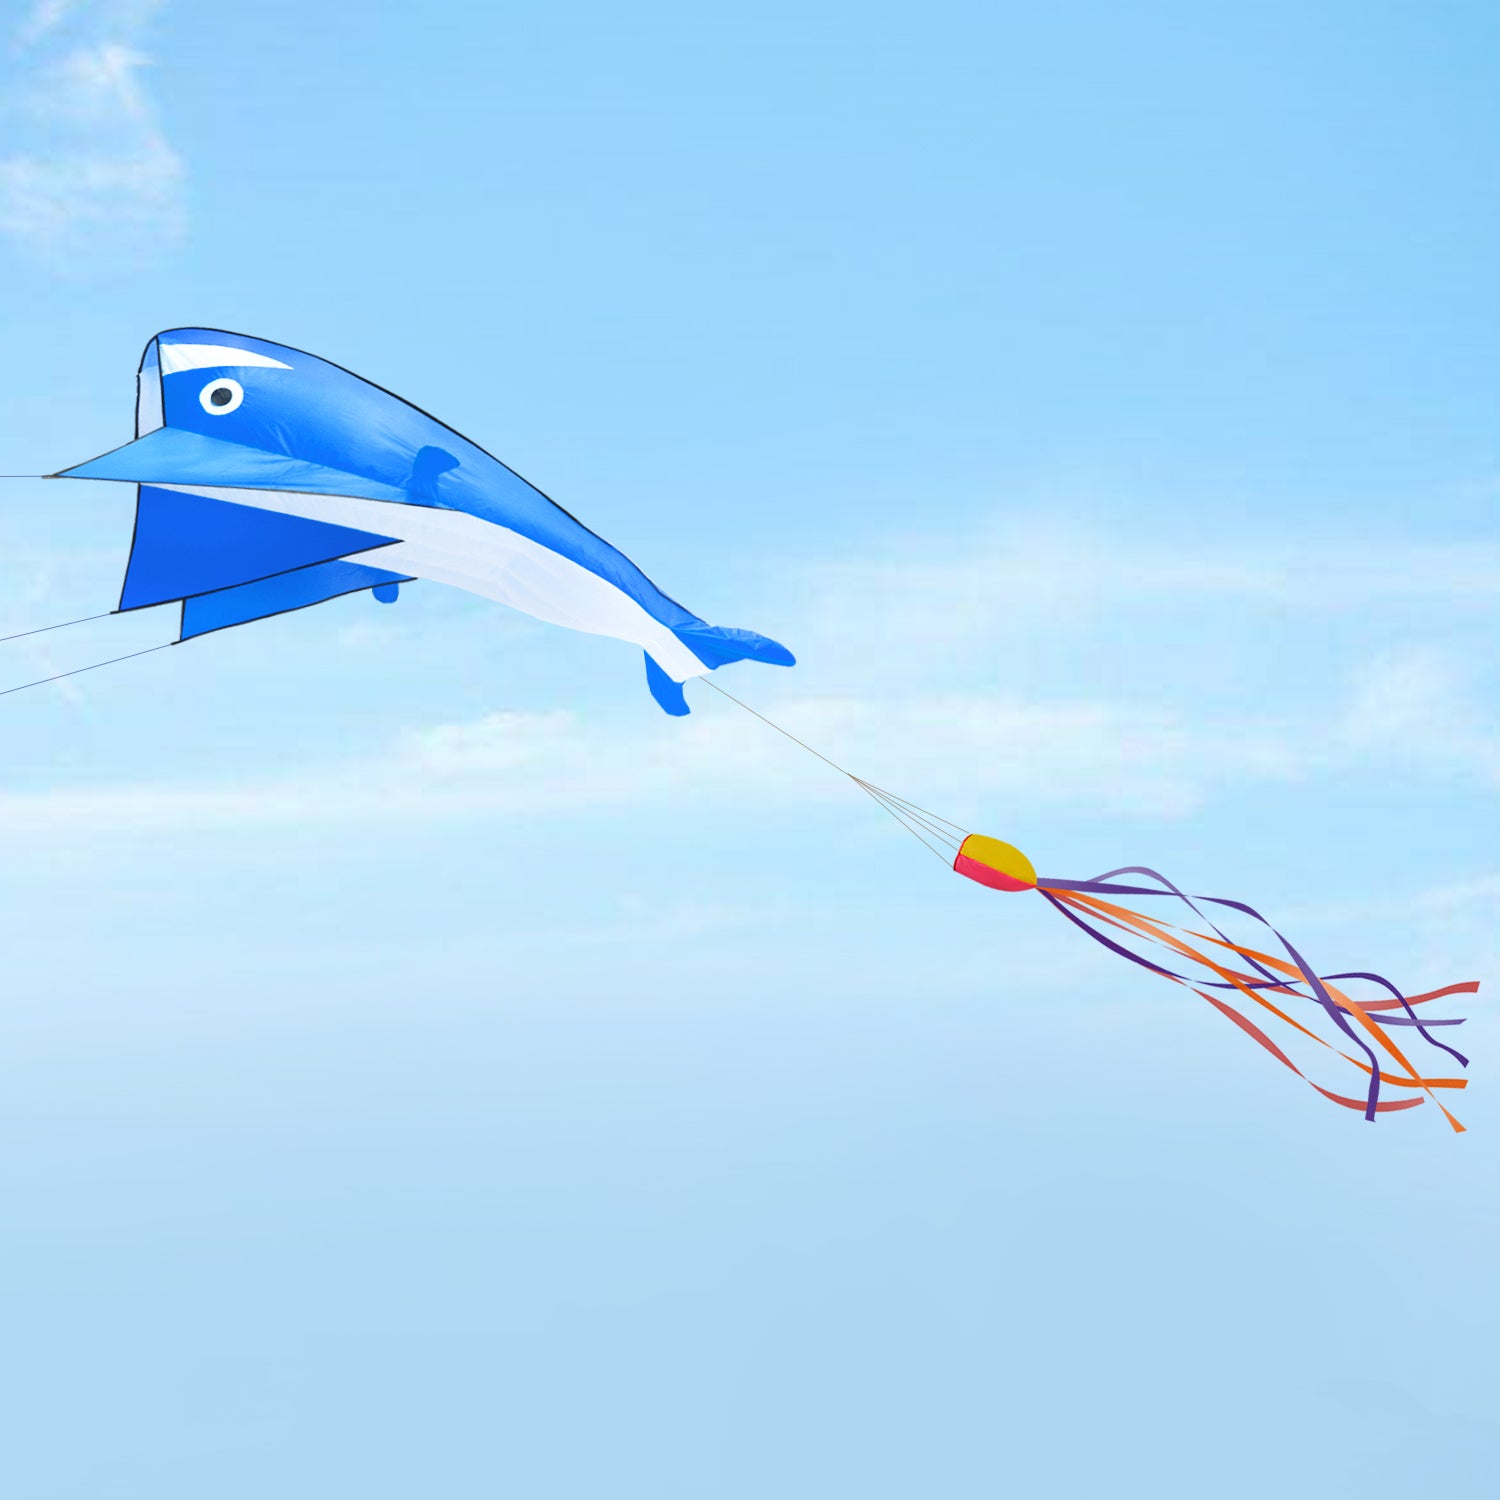 3D Kite Huge Giant Whale Flying Kite Beach Easy To Fly Frameless Soft  Parafoil Sports Beach Kite With 30m Flying Line Gift From 11,23 €